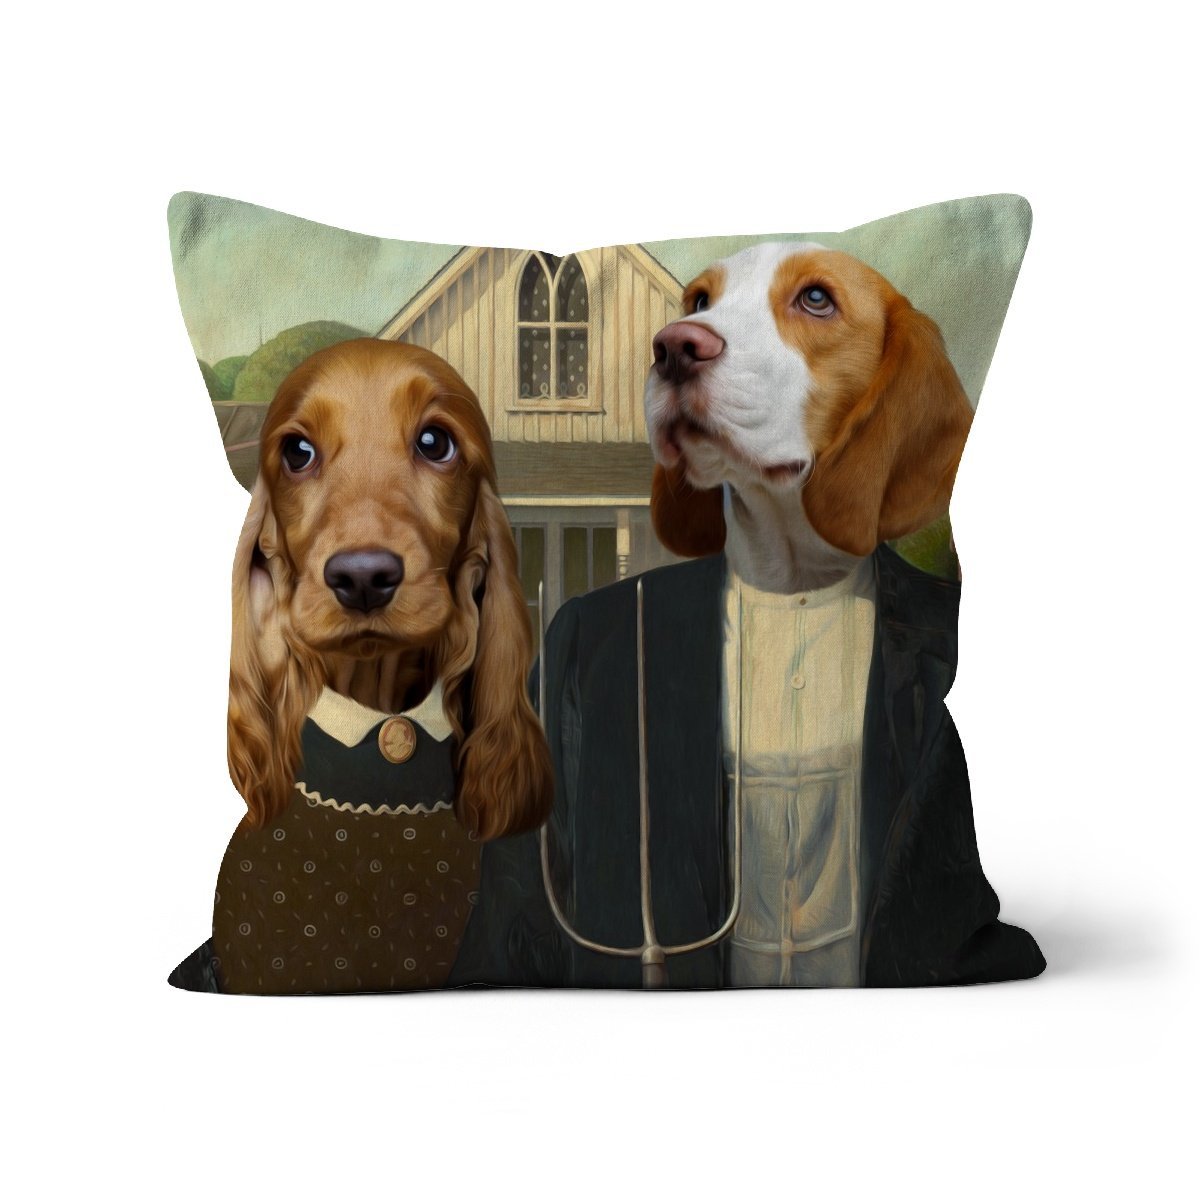 American Gothic: Custom Pet Cushion - Paw and Glory: dog pillows personalized, pet face pillows, dog photo on pillow, custom cat pillows, pillow with pet picture